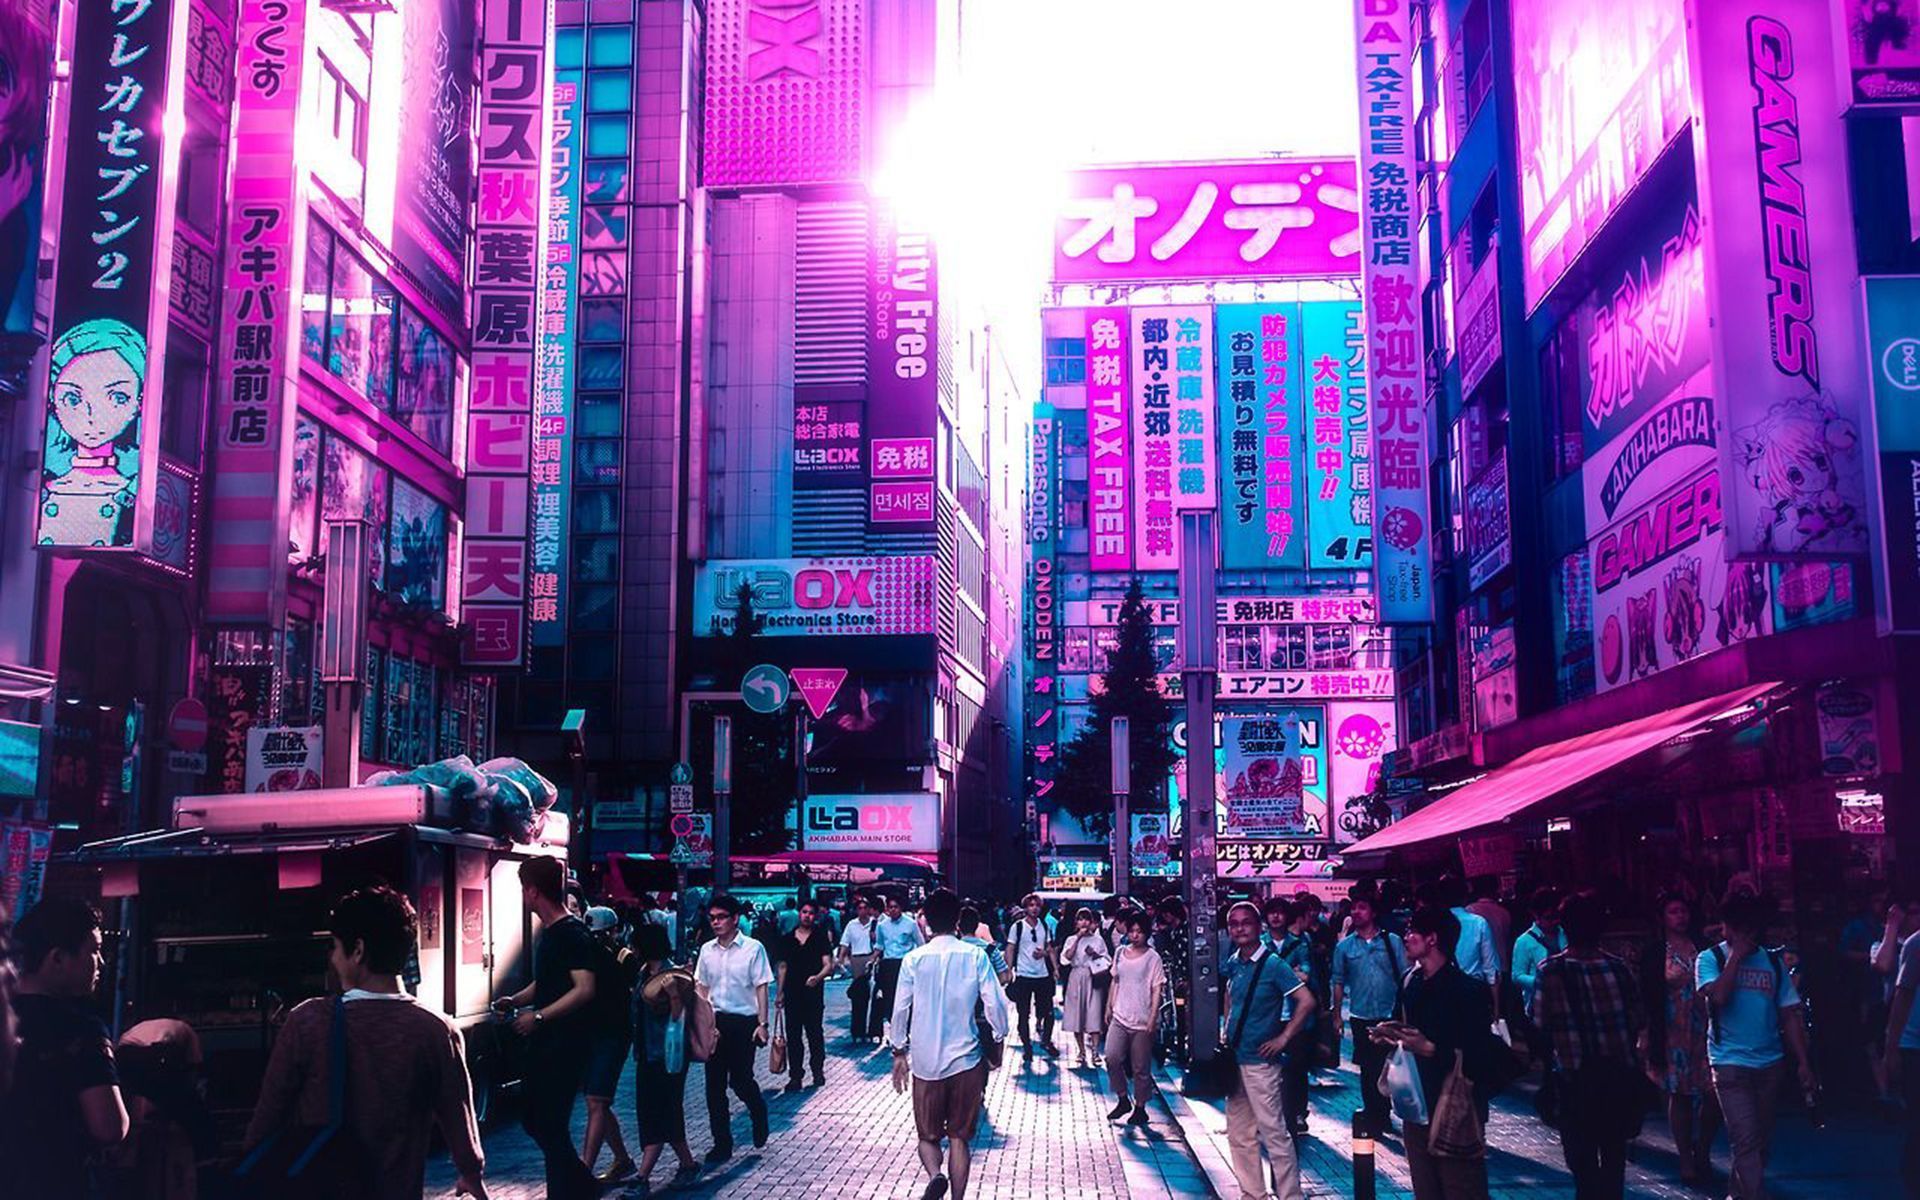 A busy street in Tokyo with people walking around and neon signs all around - Japan